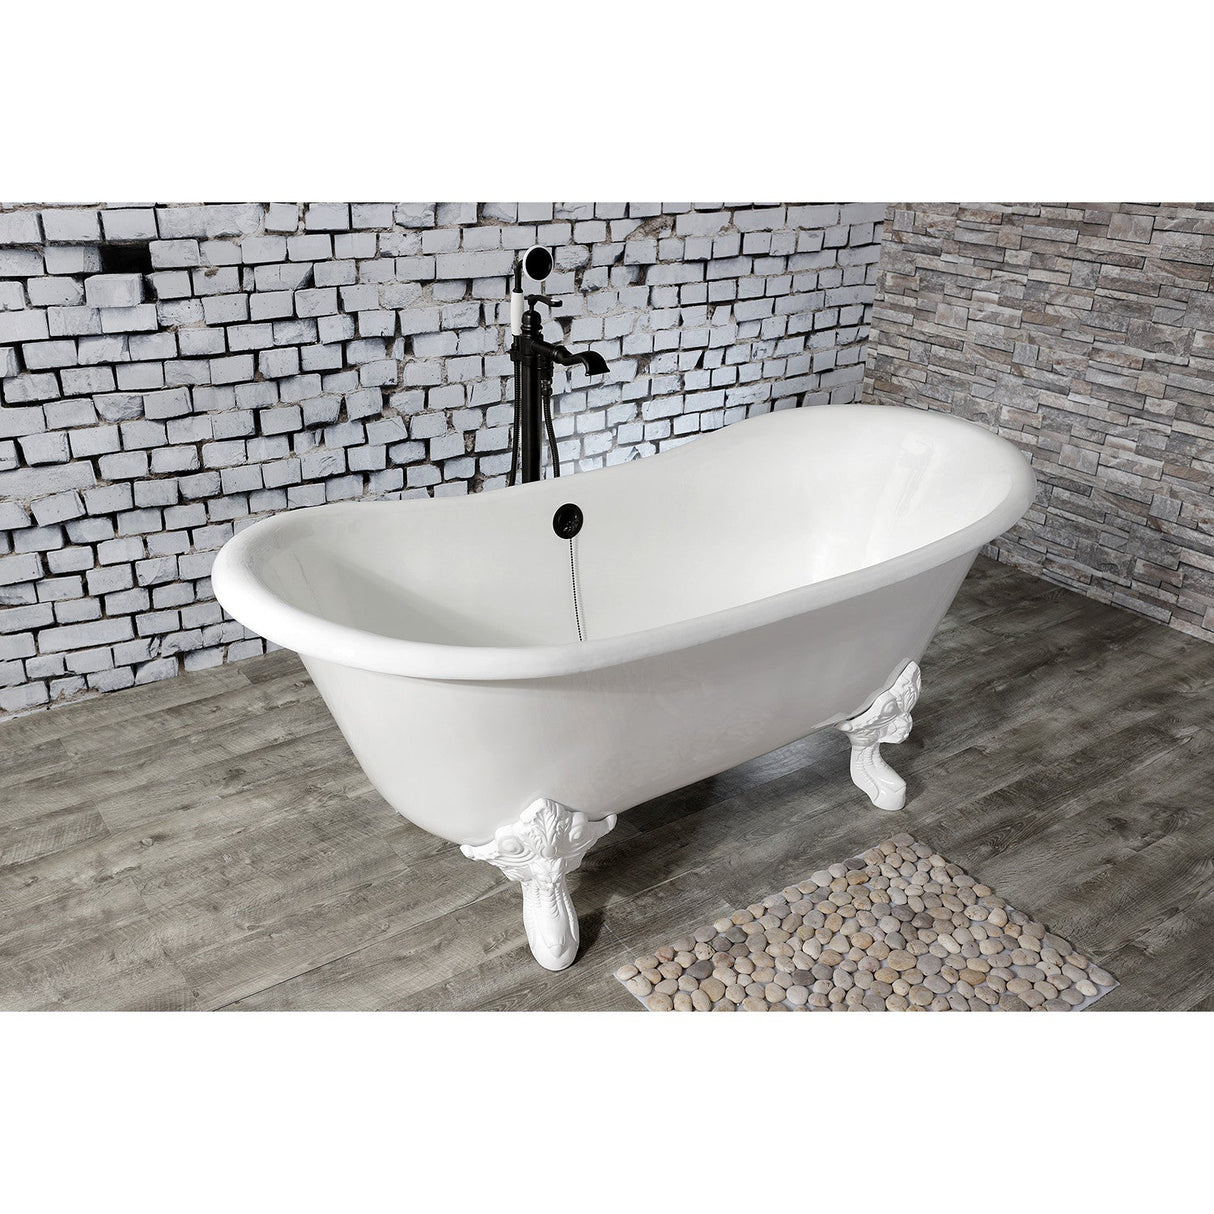 Aqua Eden VCTNDS6731NLW 67-Inch Cast Iron Double Slipper Clawfoot Tub (No Faucet Drillings), White